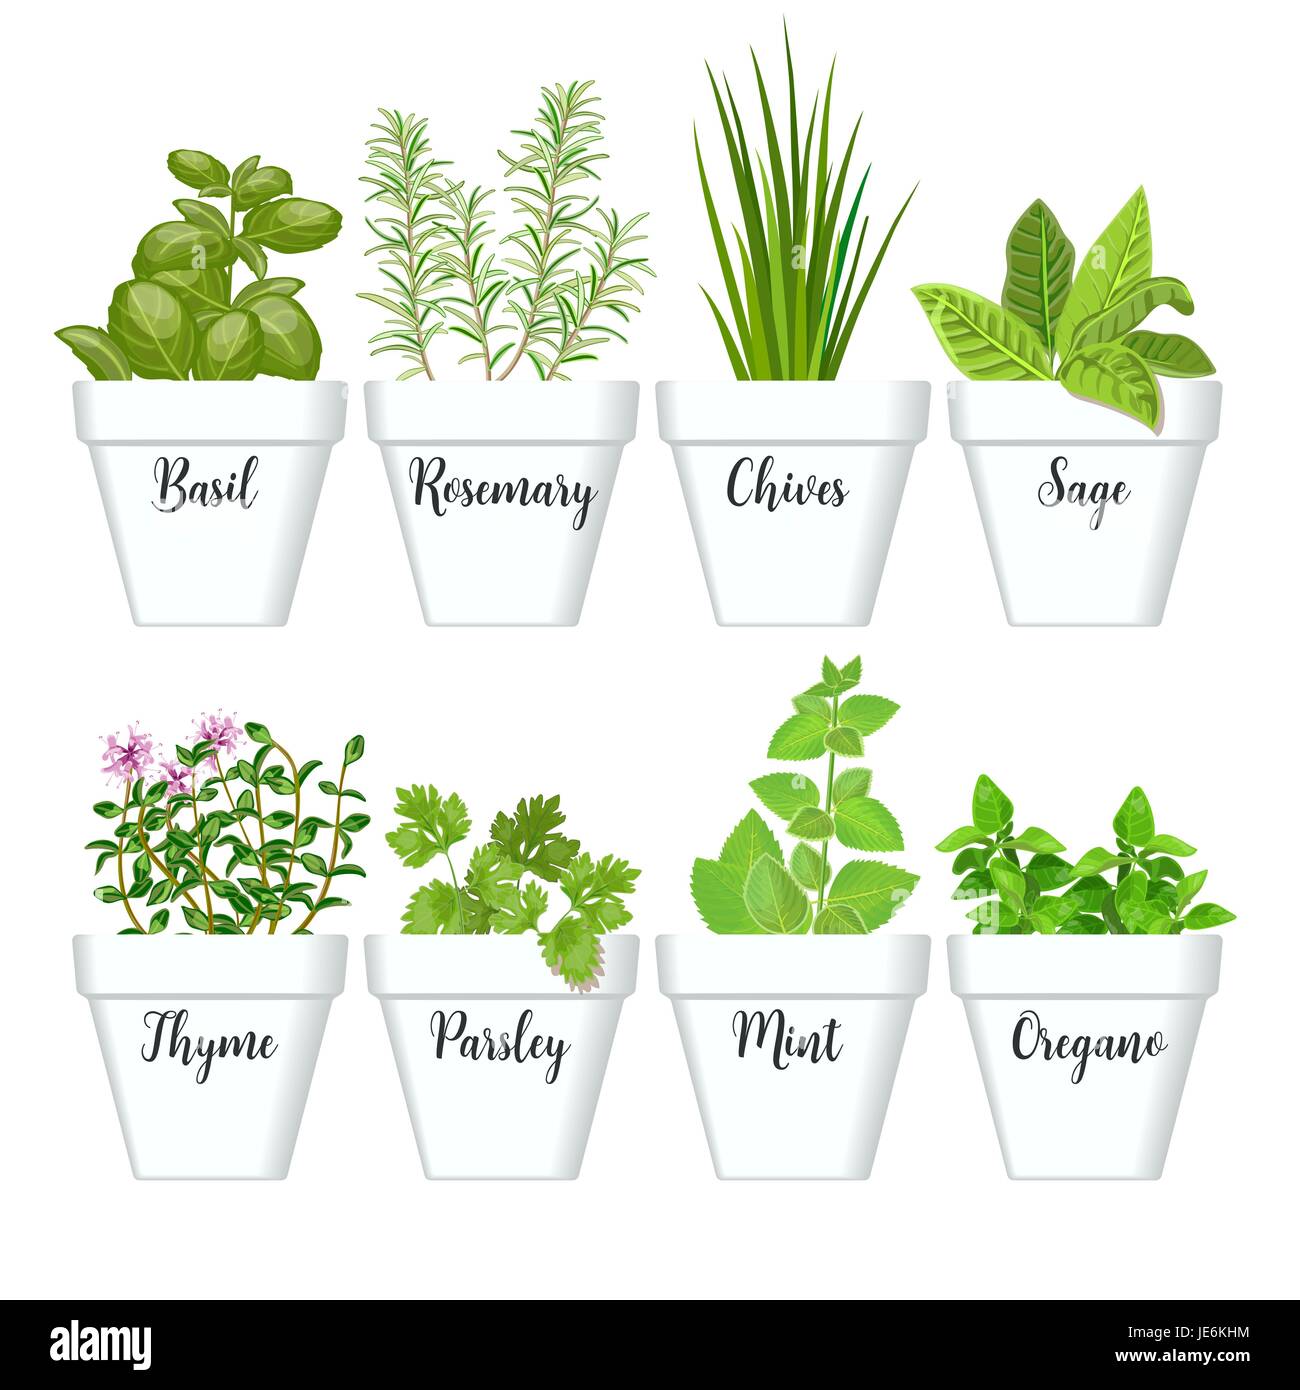 Set of culinary herbs in white pots with labels. Green basil, sage, rosemary, chives, thyme, parsley, mint, oregano with text above Stock Vector